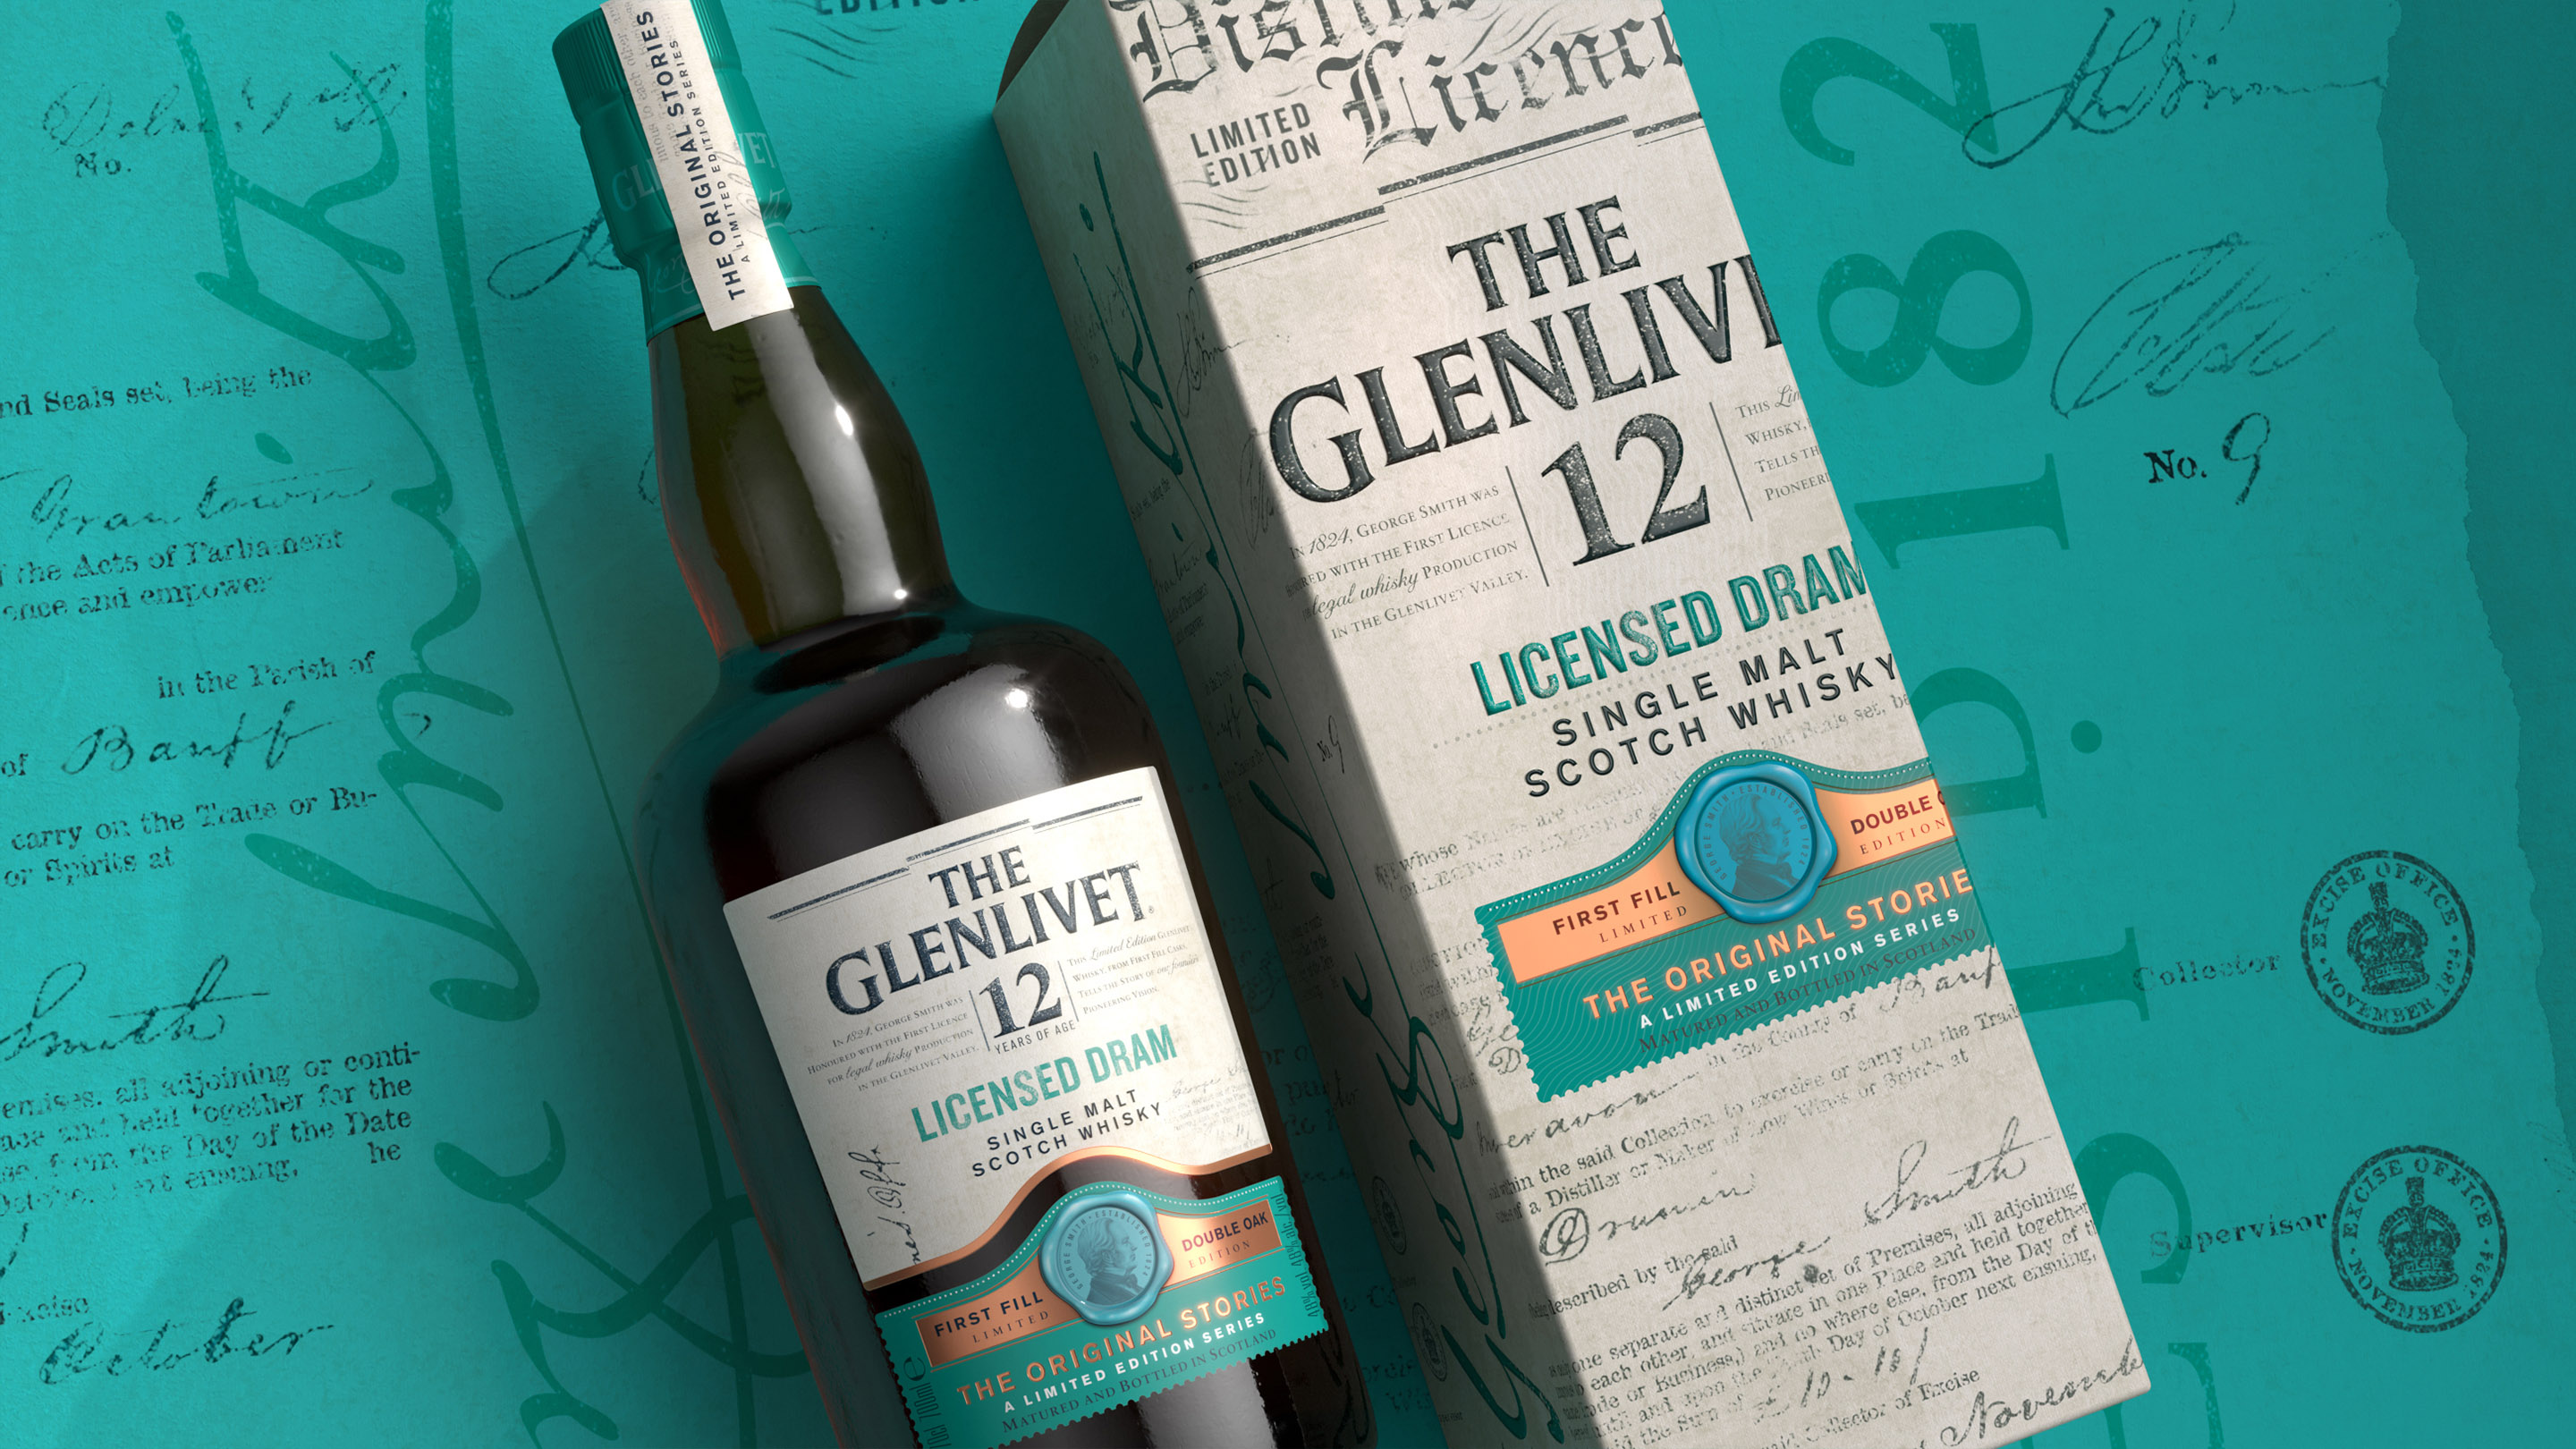 JDO Breathes Life Into History With the Design of the Glenlivet 12 Year Old Licensed Dram